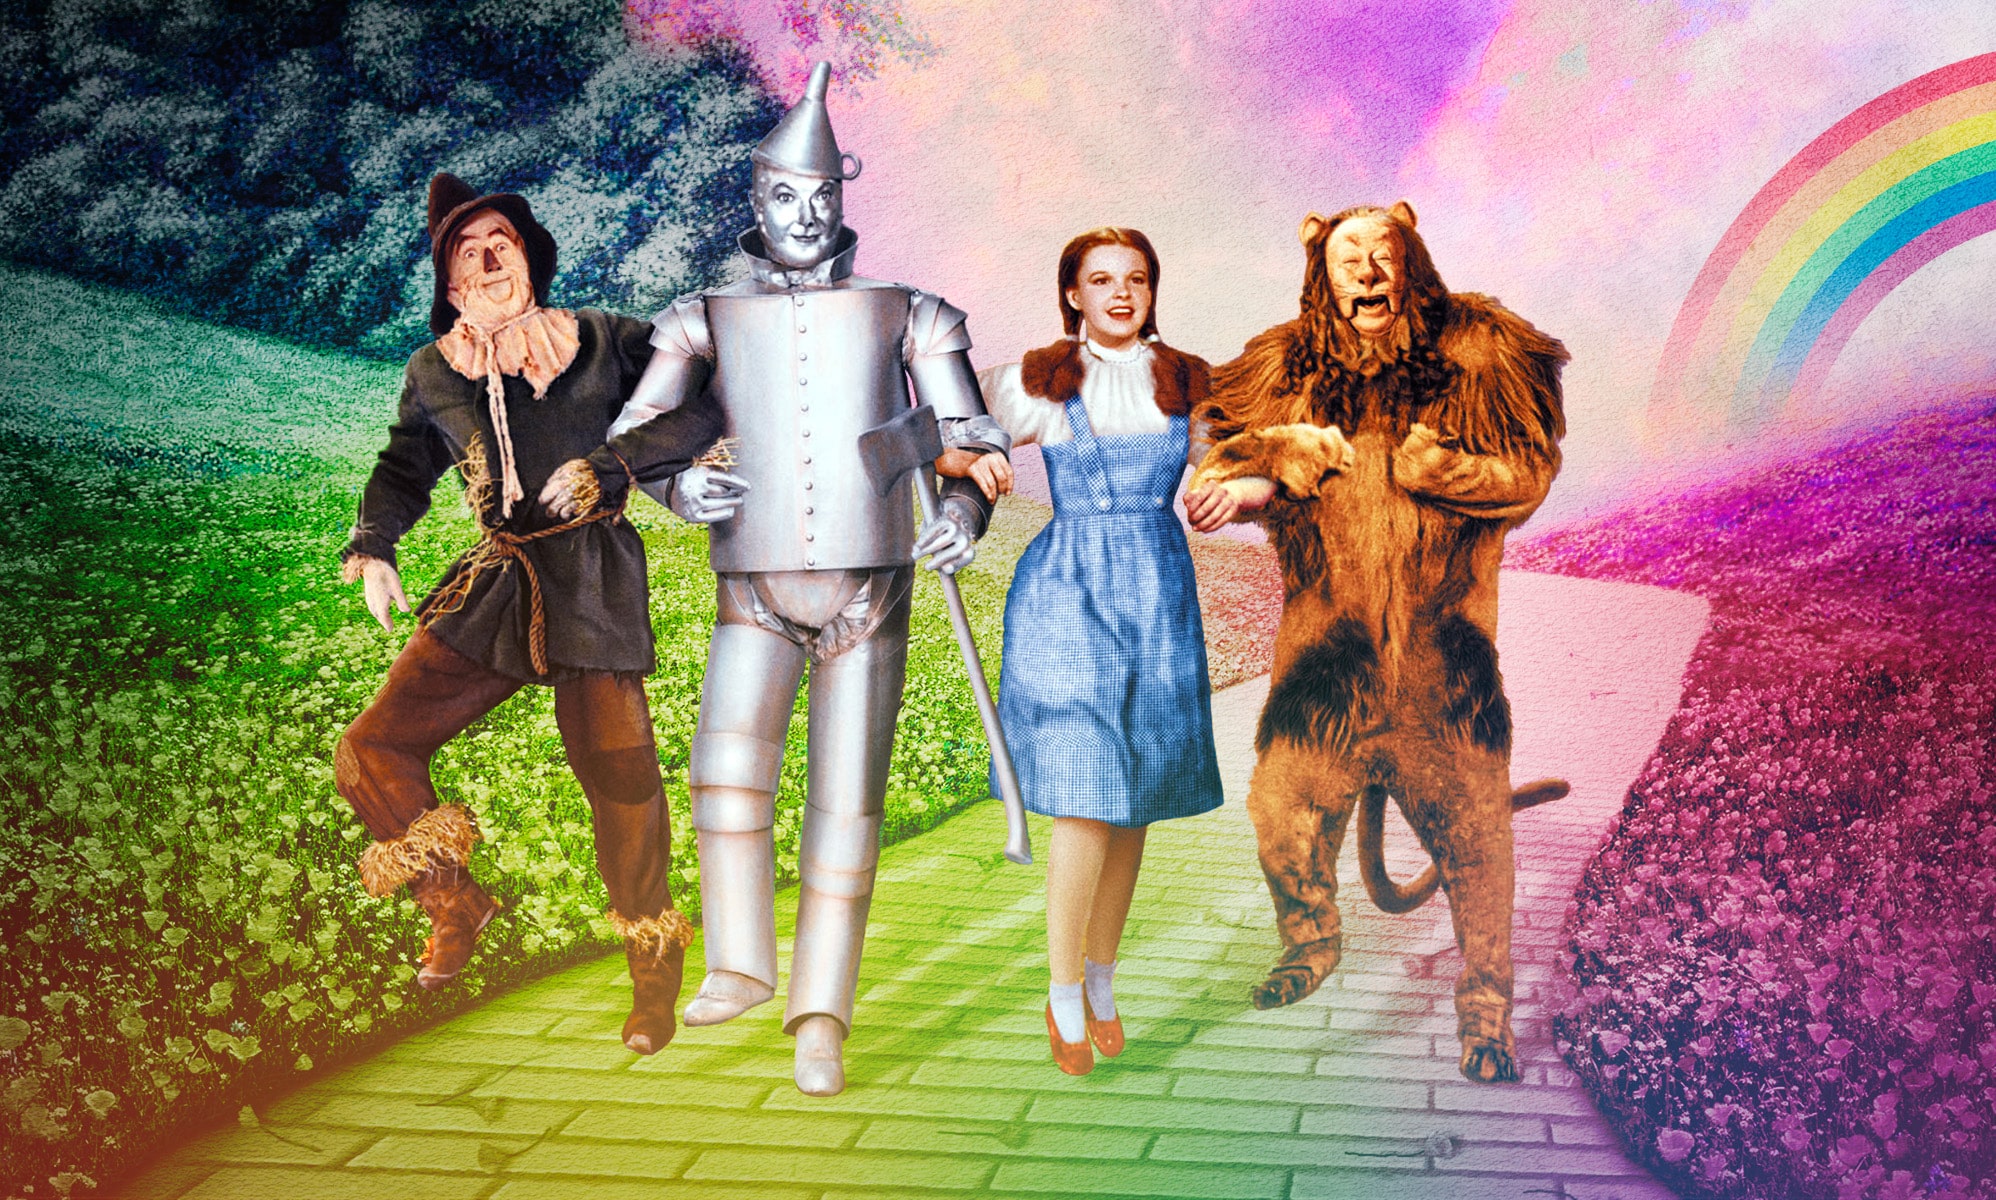 Kenya Barris Wizard of Oz remake will be unapologetically LGBTQ